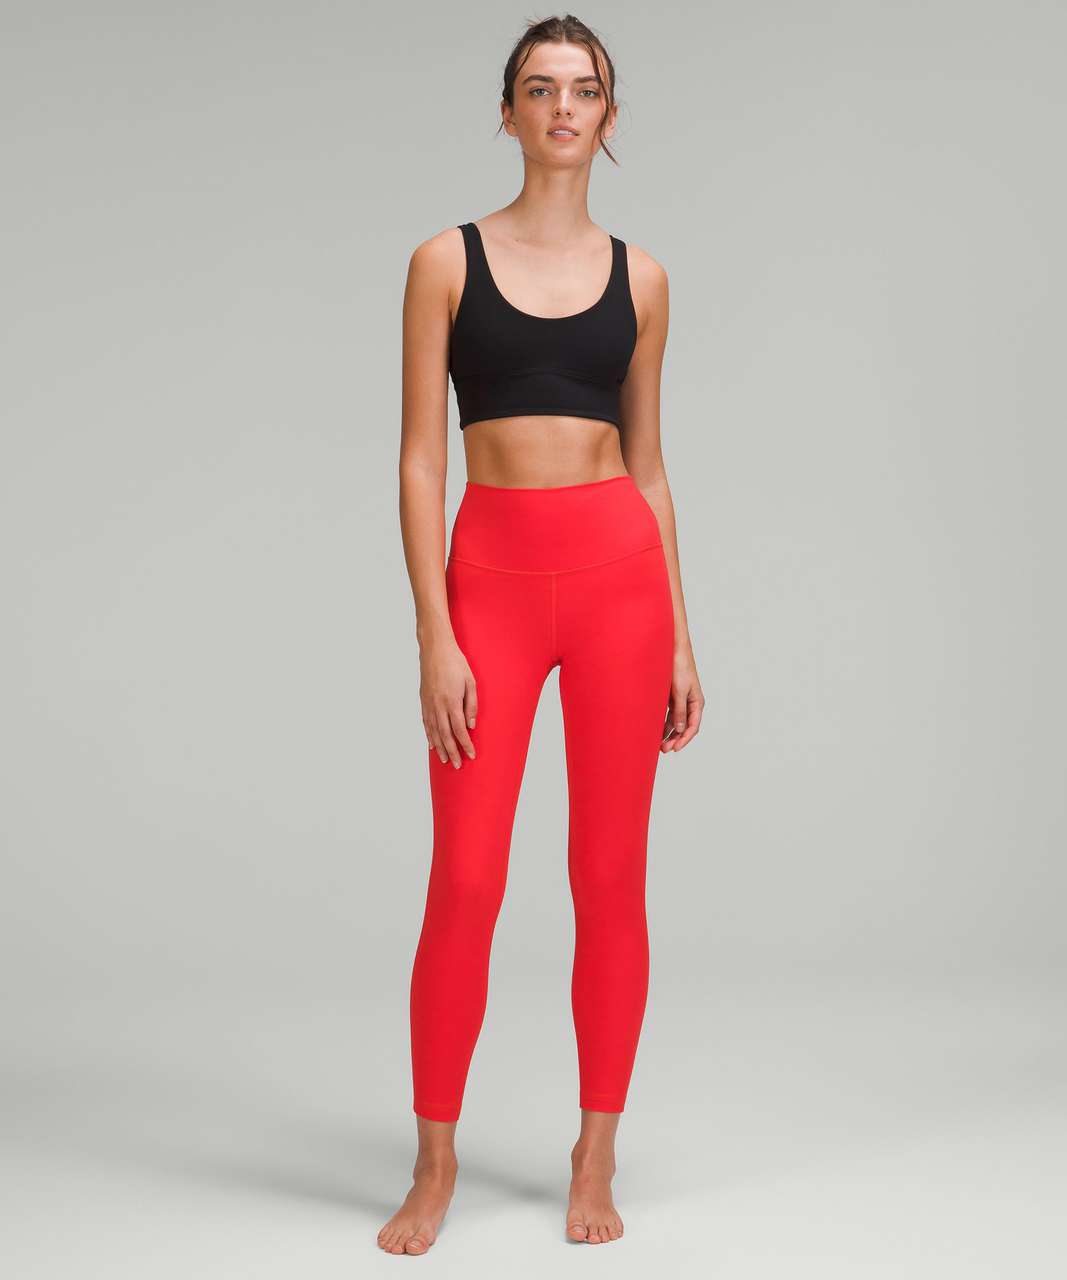 lululemon athletica, Pants & Jumpsuits, Limited Edition Lululemon Align  25 Lunar New Year Smoky Red Size 4